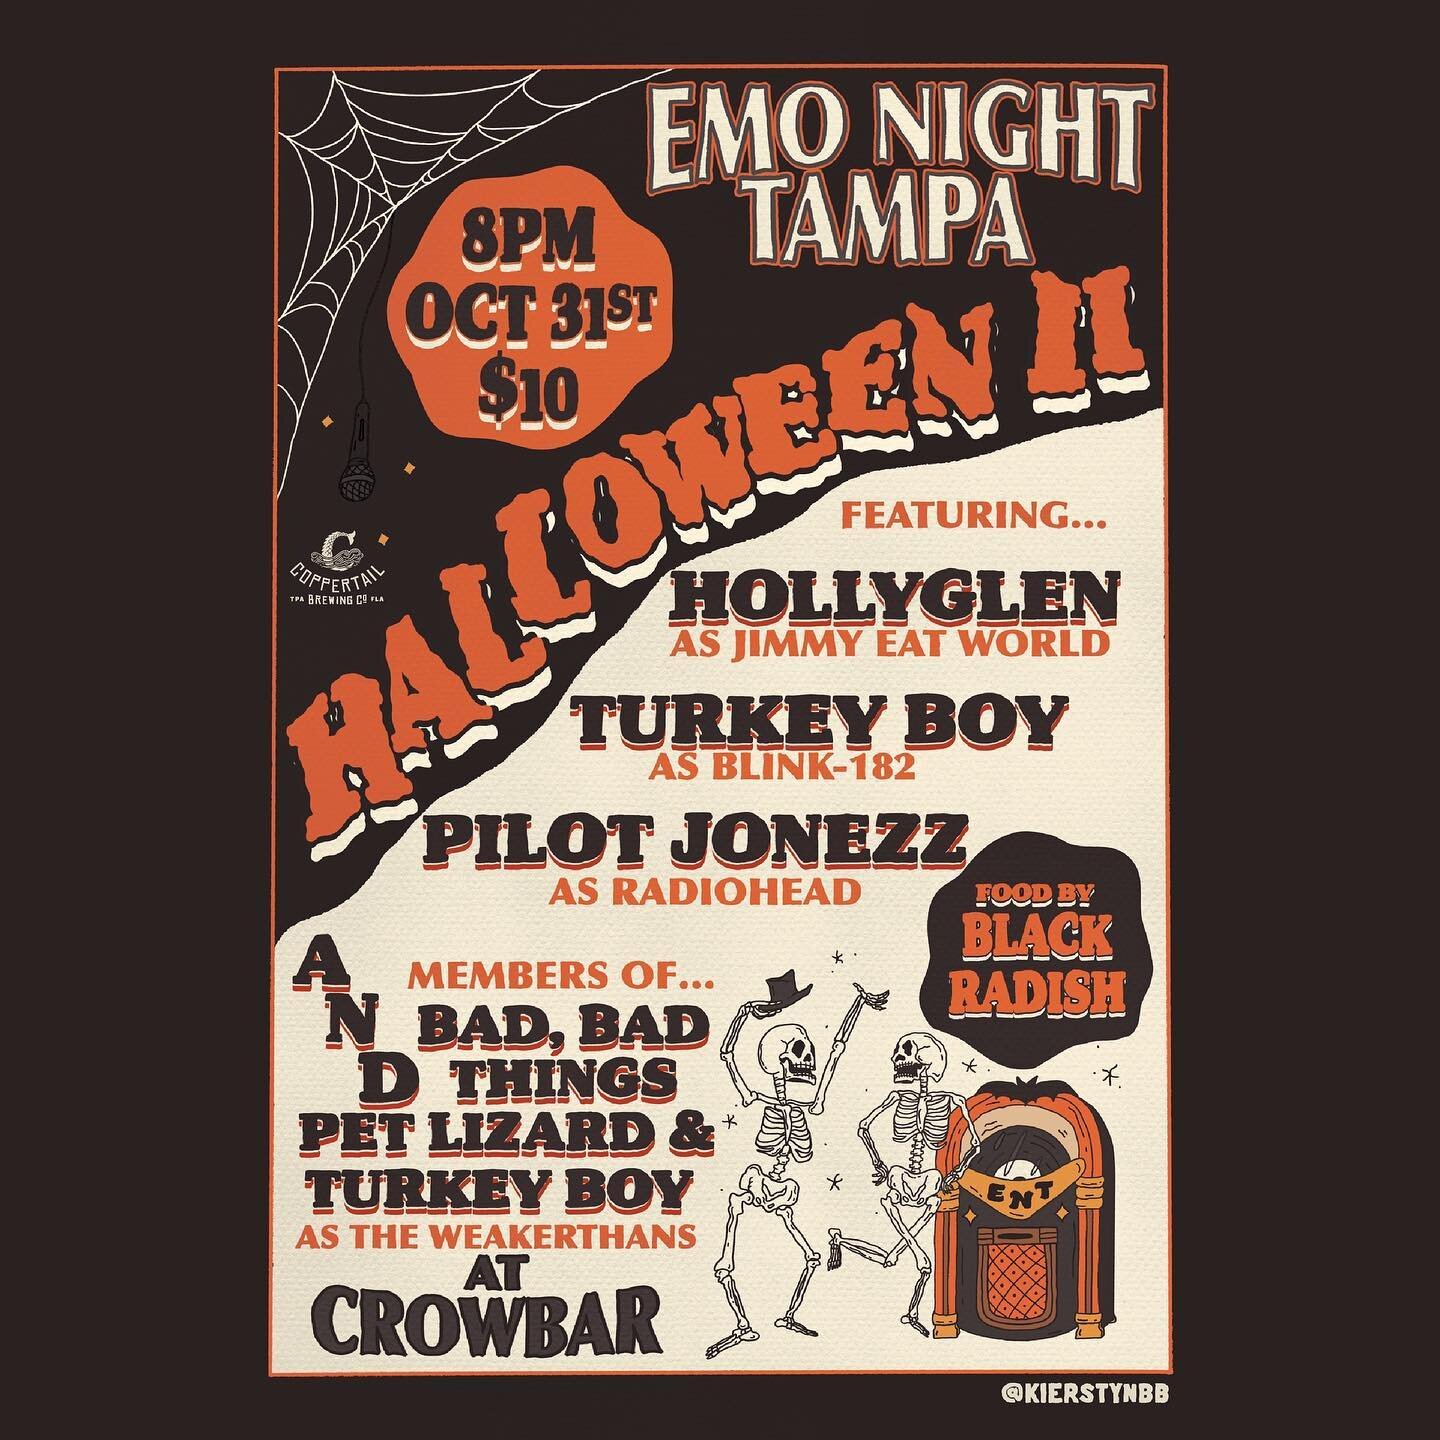 Hey buds!

Super hyped to announce our second Halloween party. If ya missed last years, you missed out on a banger.  Shouts to Mind Wash &amp; Amateur Taxidermy. 

This year, on Halloween night, we are back with 4 new bands &amp; their take.  We have